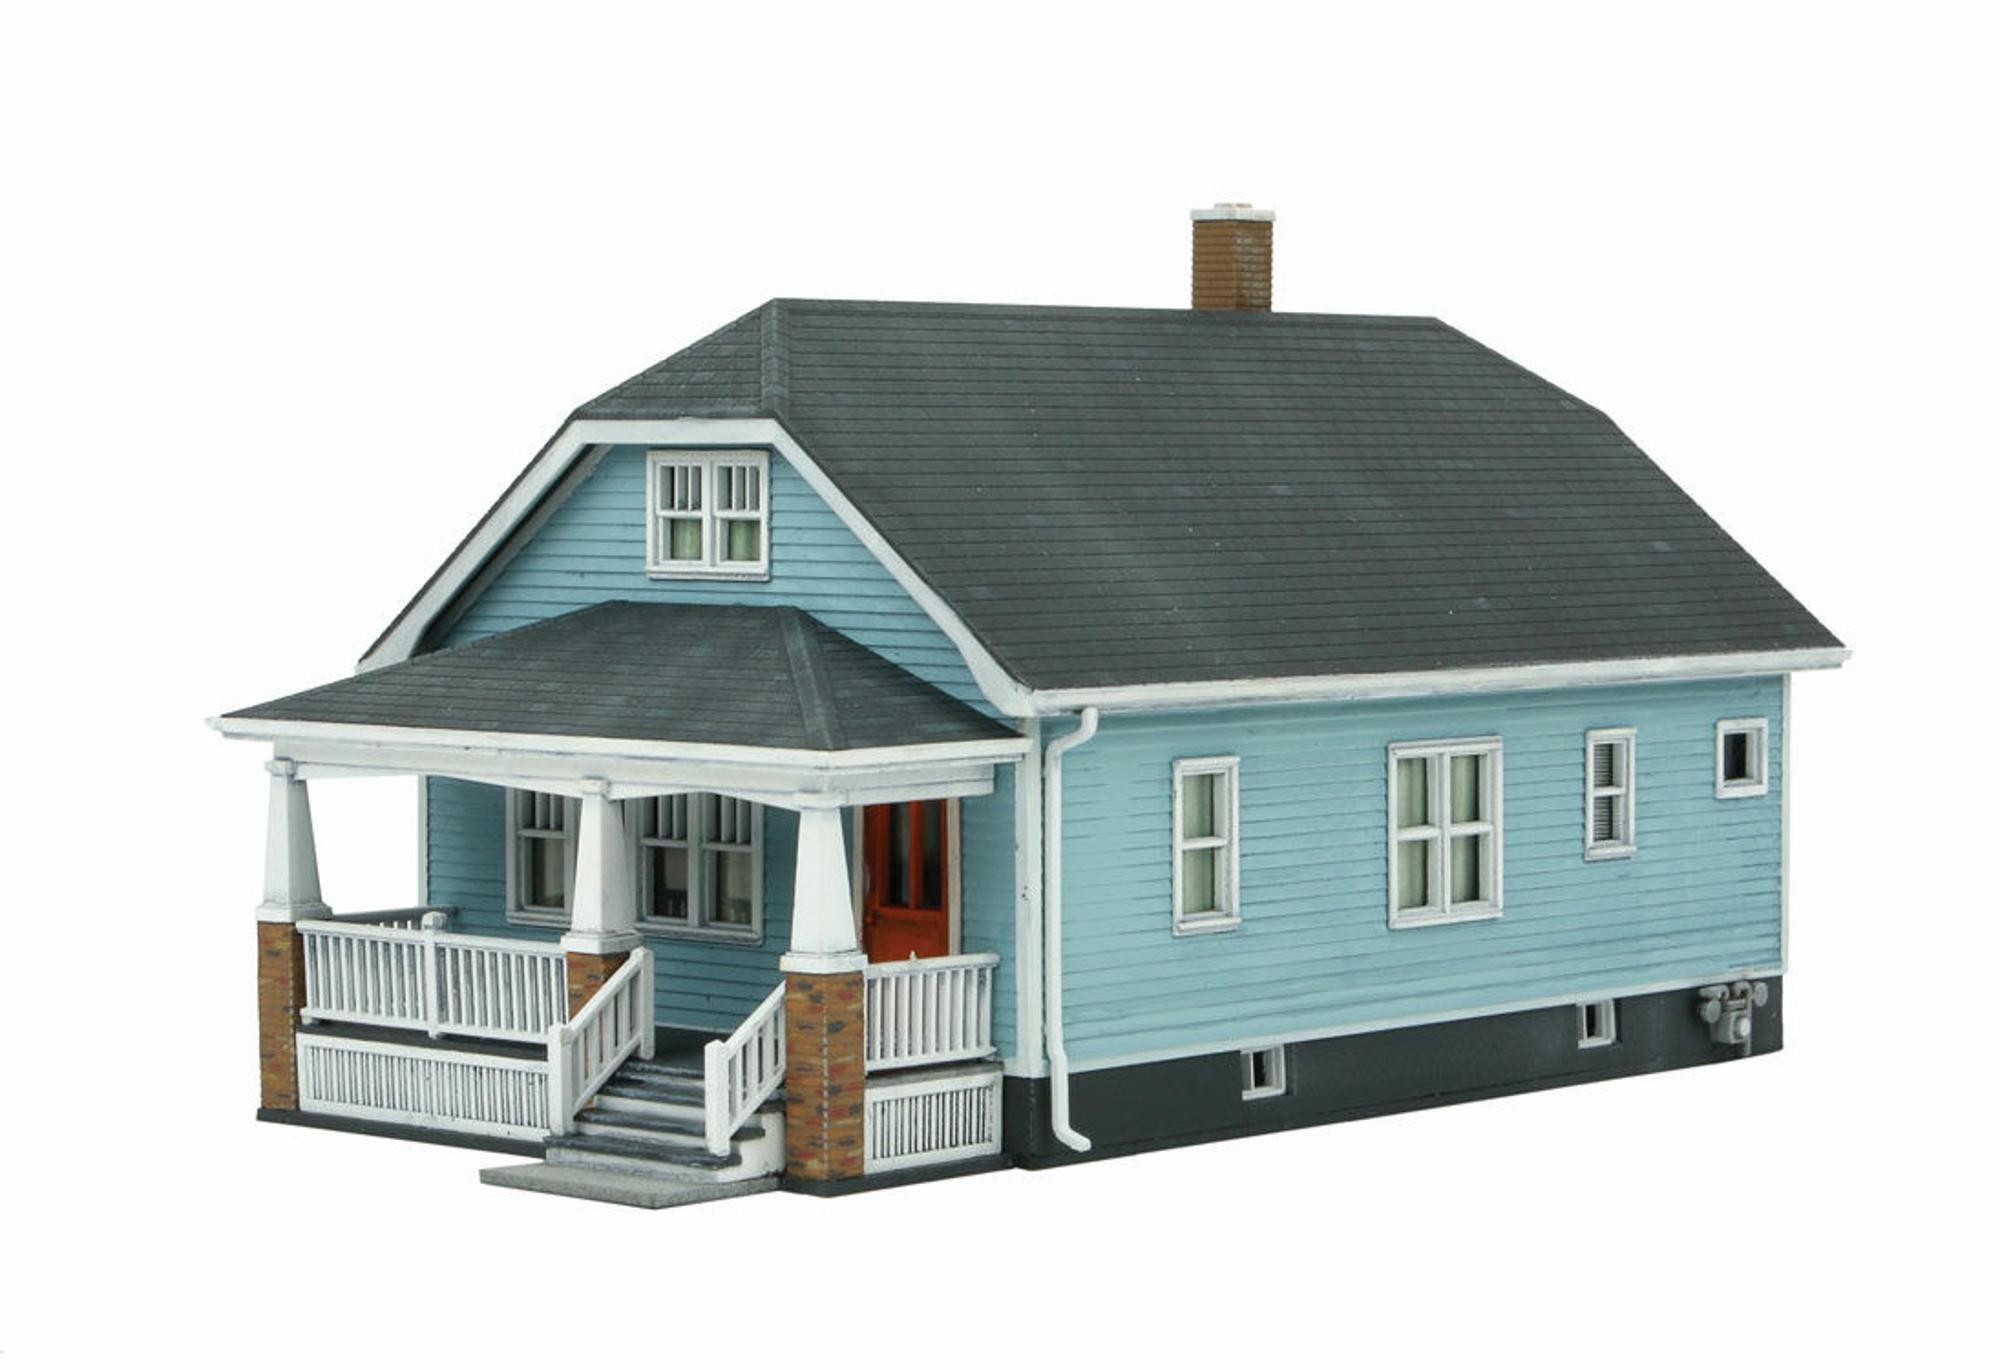 Walthers HO Scale American Bungalow Model Kit